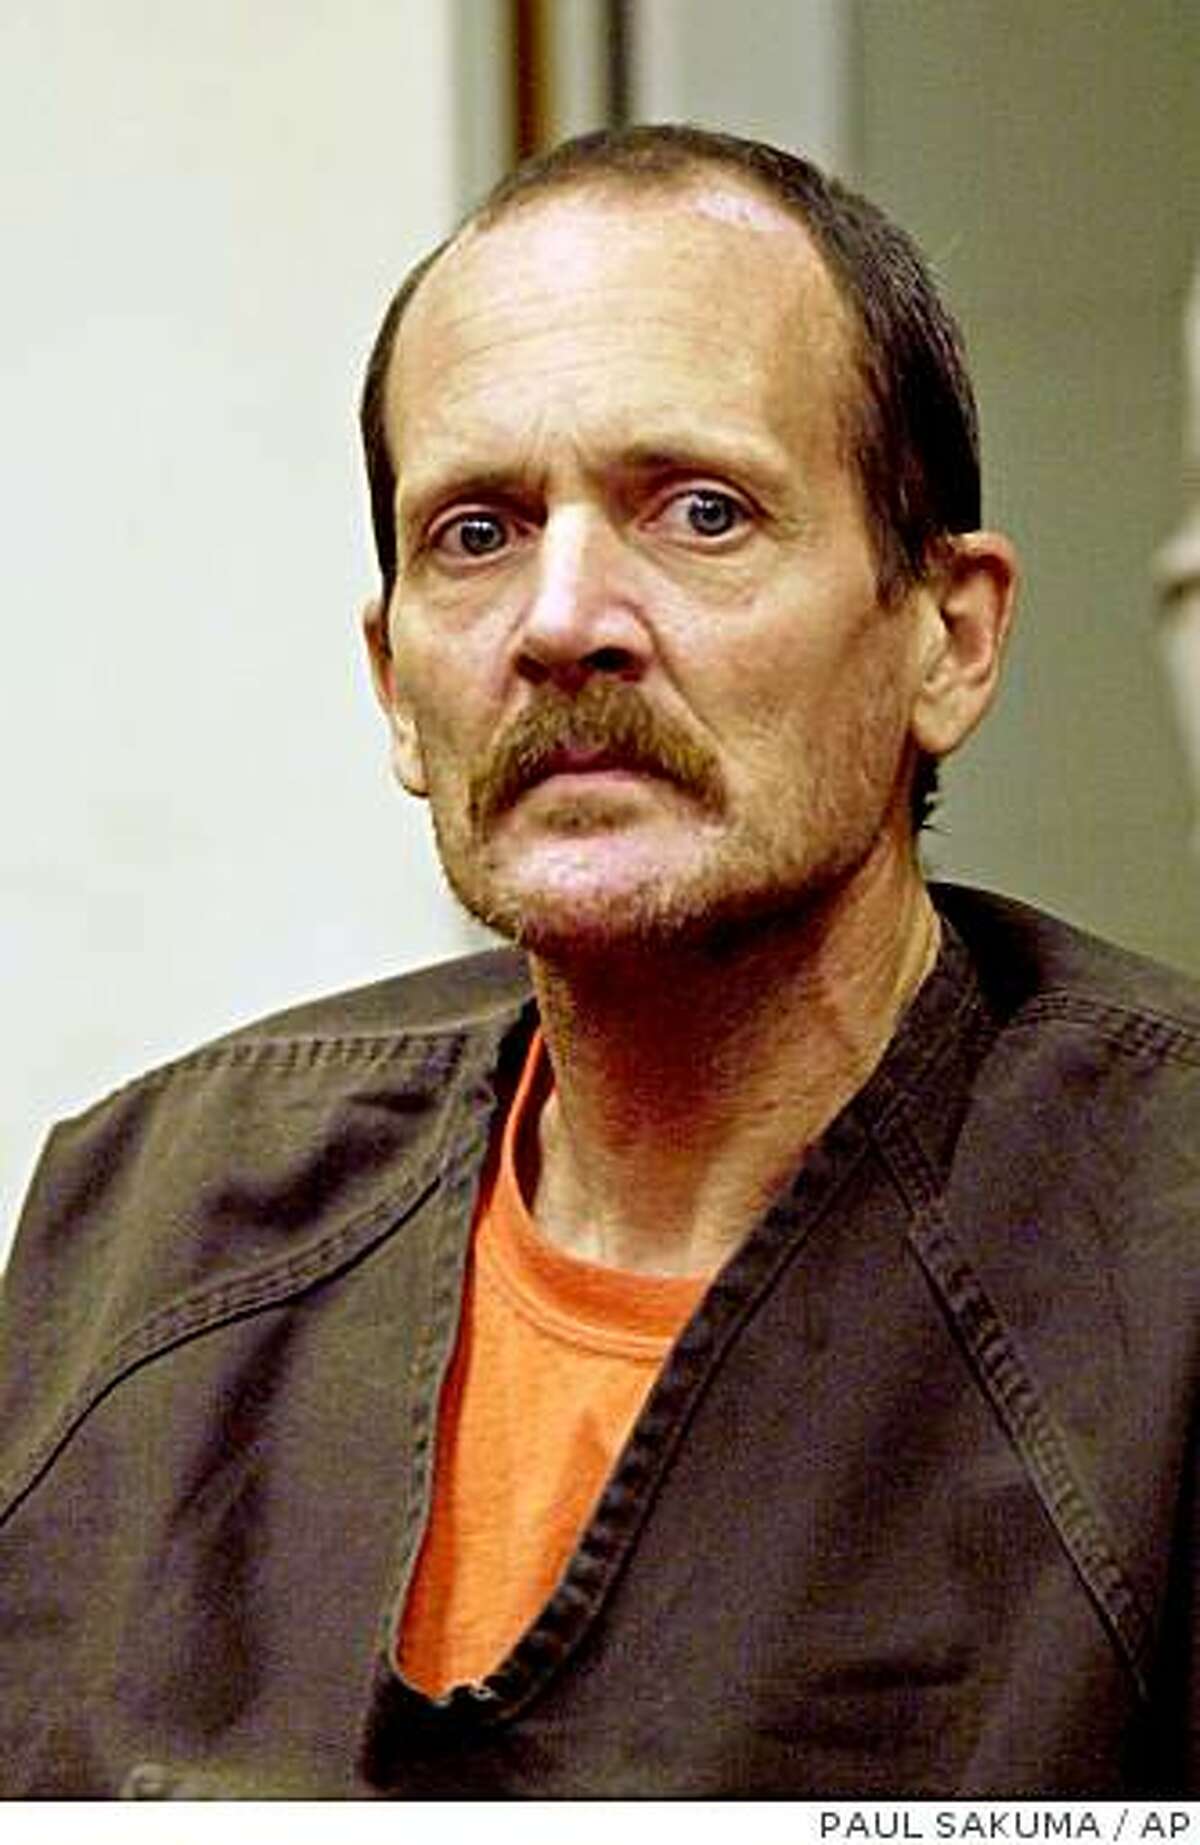 Curtis Dean Anderson listens to a judge during a hearing in a San Jose, Calif., courtroom, Thursday, May 27, 2004.